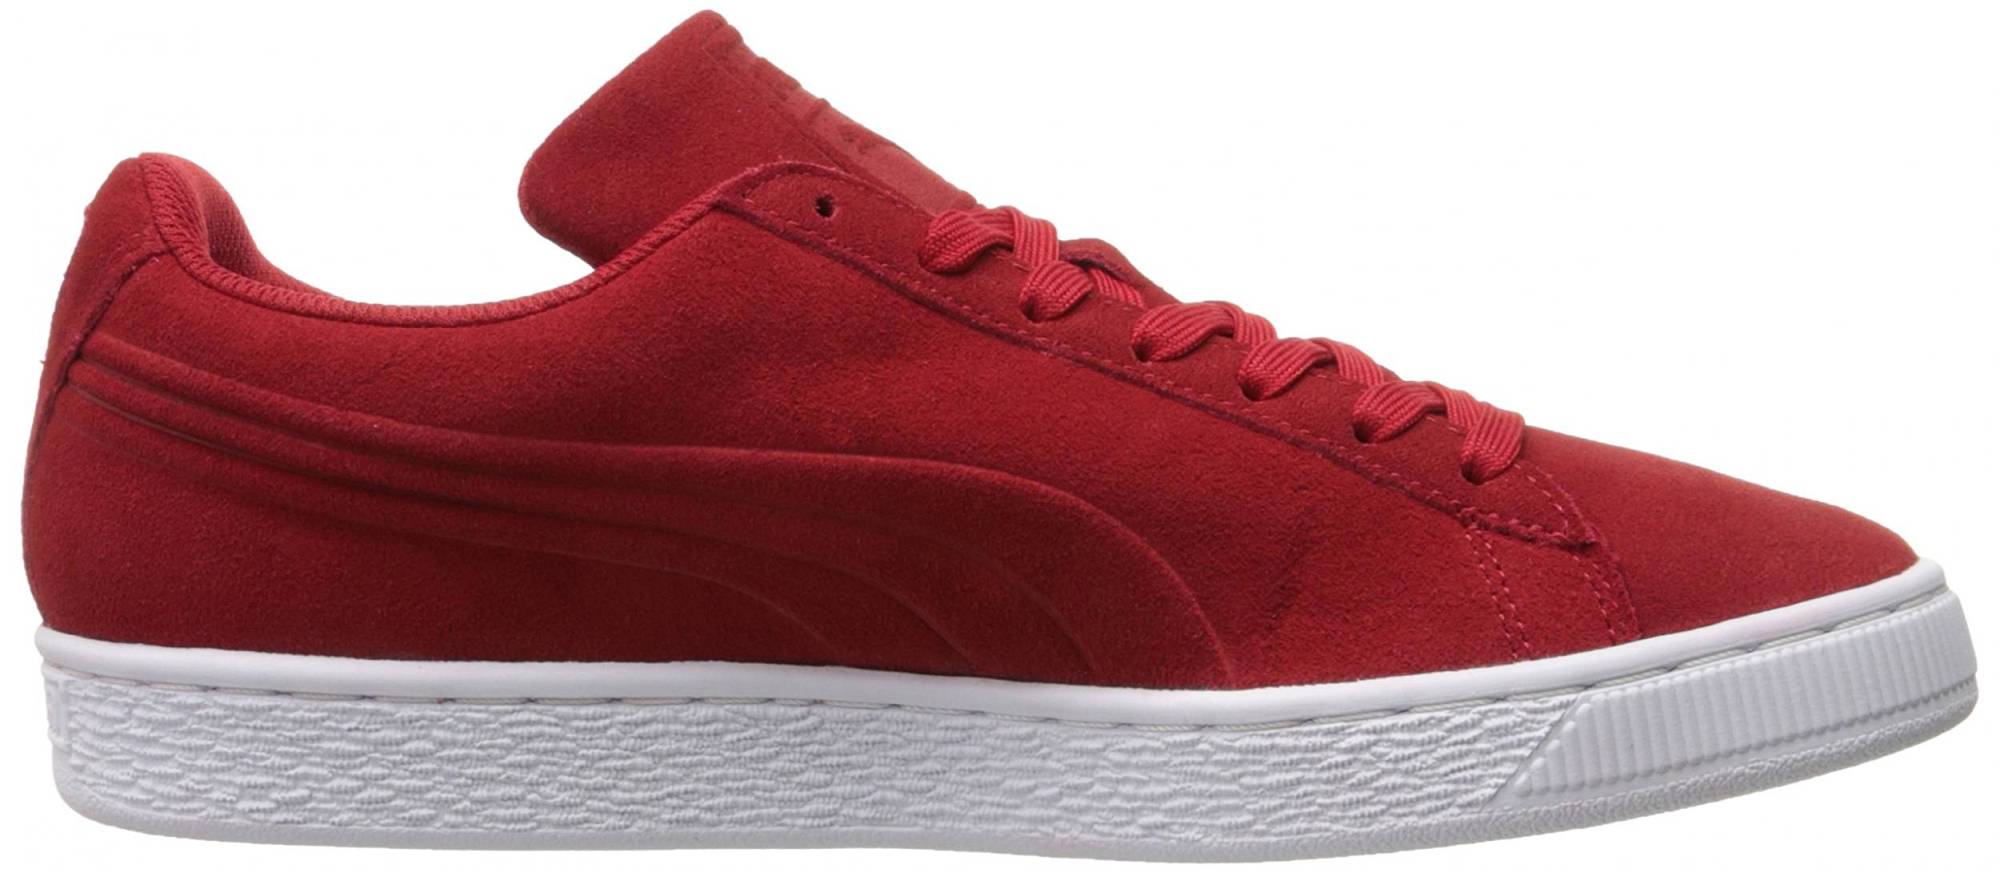 Puma Suede Classic Debossed Q3 – Shoes Reviews & Reasons To Buy